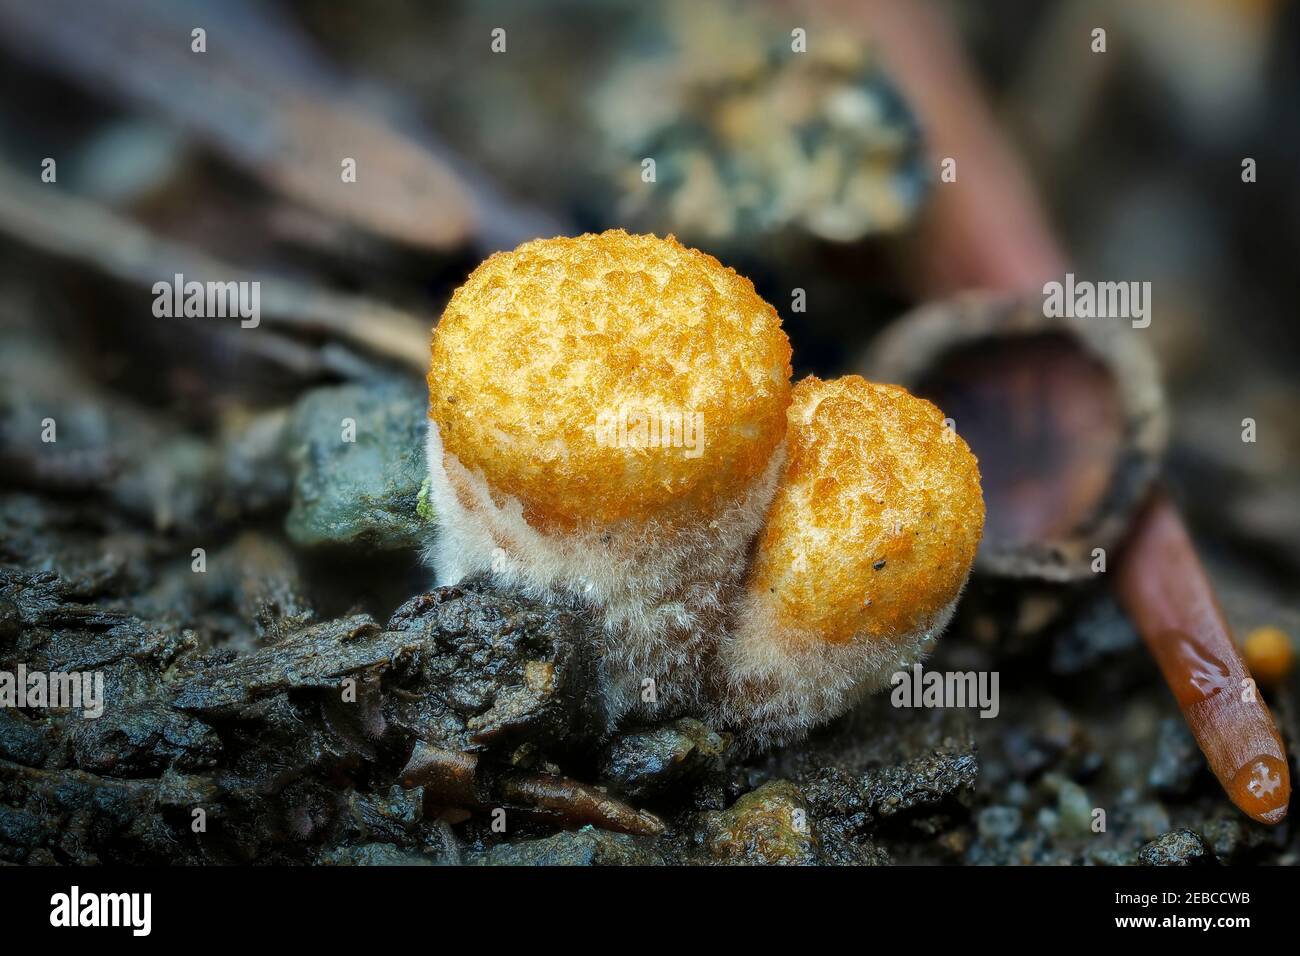 Crucibulum is a genus in the Nidulariaceae, a family of fungi whose fruiting bodies resemble tiny egg-filled birds nests. , an intresting photo Stock Photo